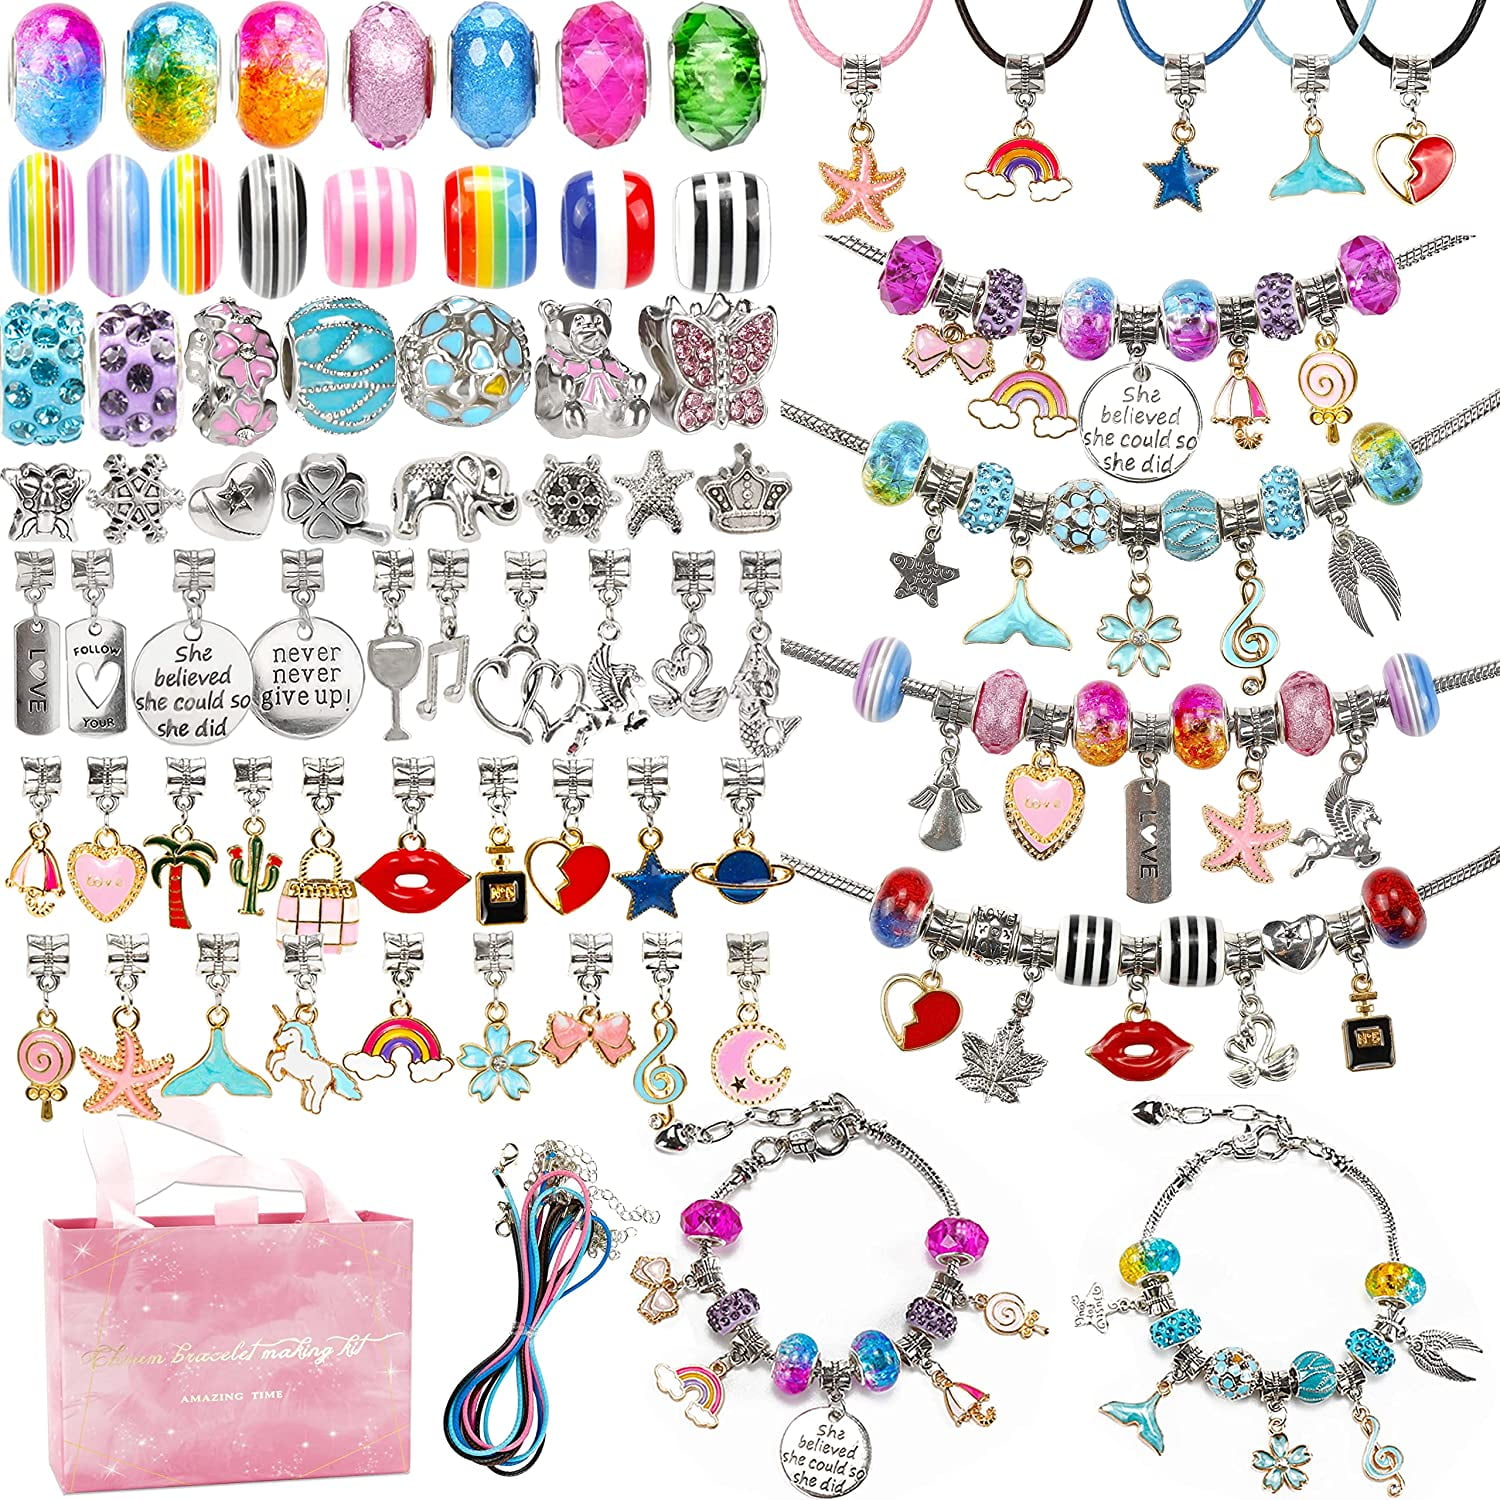 130-Piece Charm Bracelet Making Kit - Includes Jewelry Beads, Snake Chains,  and DIY Craft Supplies for Girls - Perfect Jewelry Christmas Gift Set for